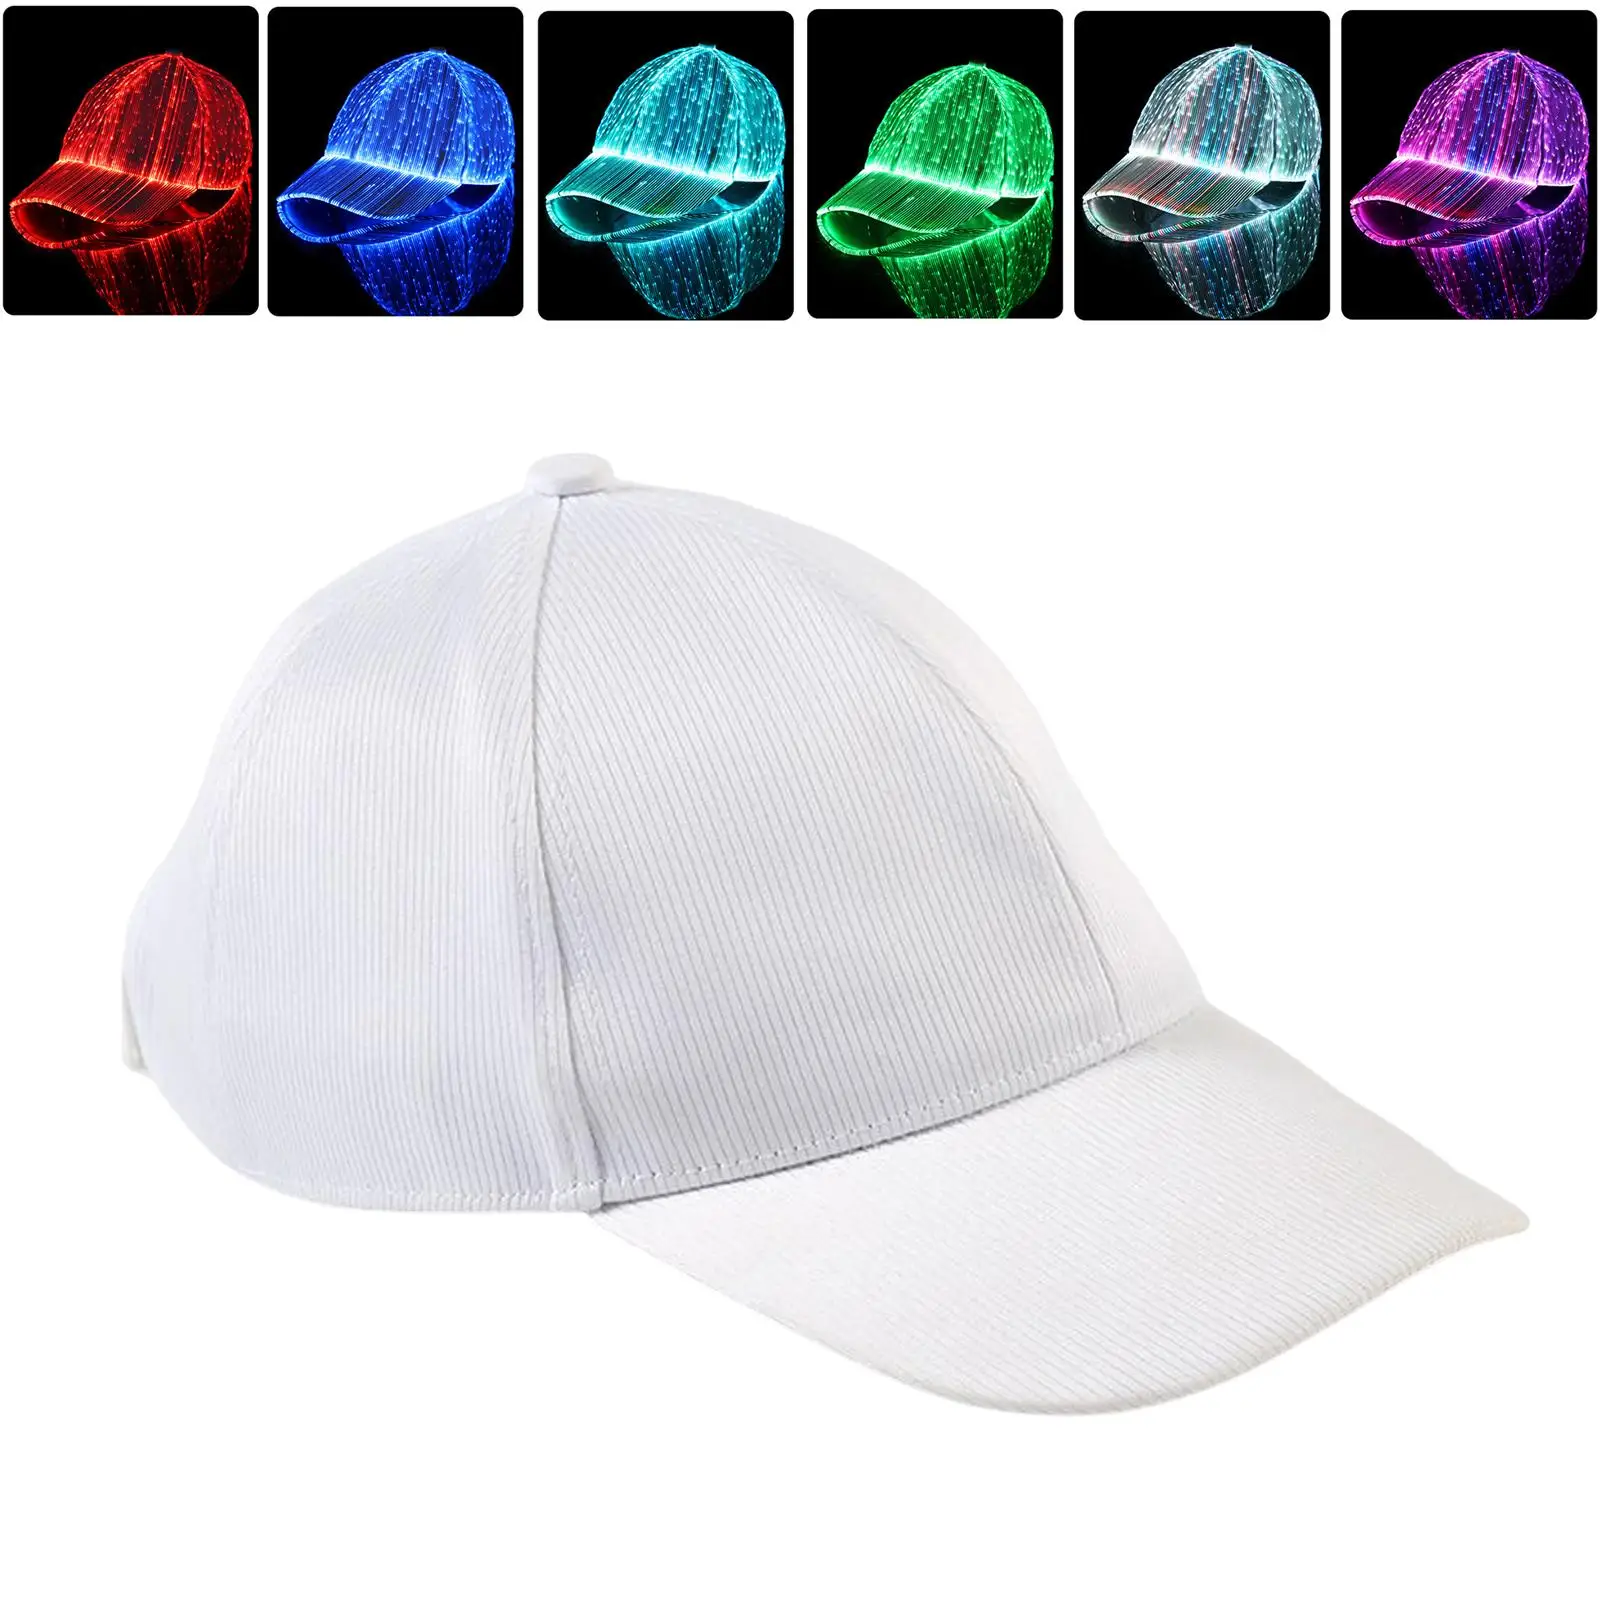 Usb Charging Luminous Hats For Club Christmas Event